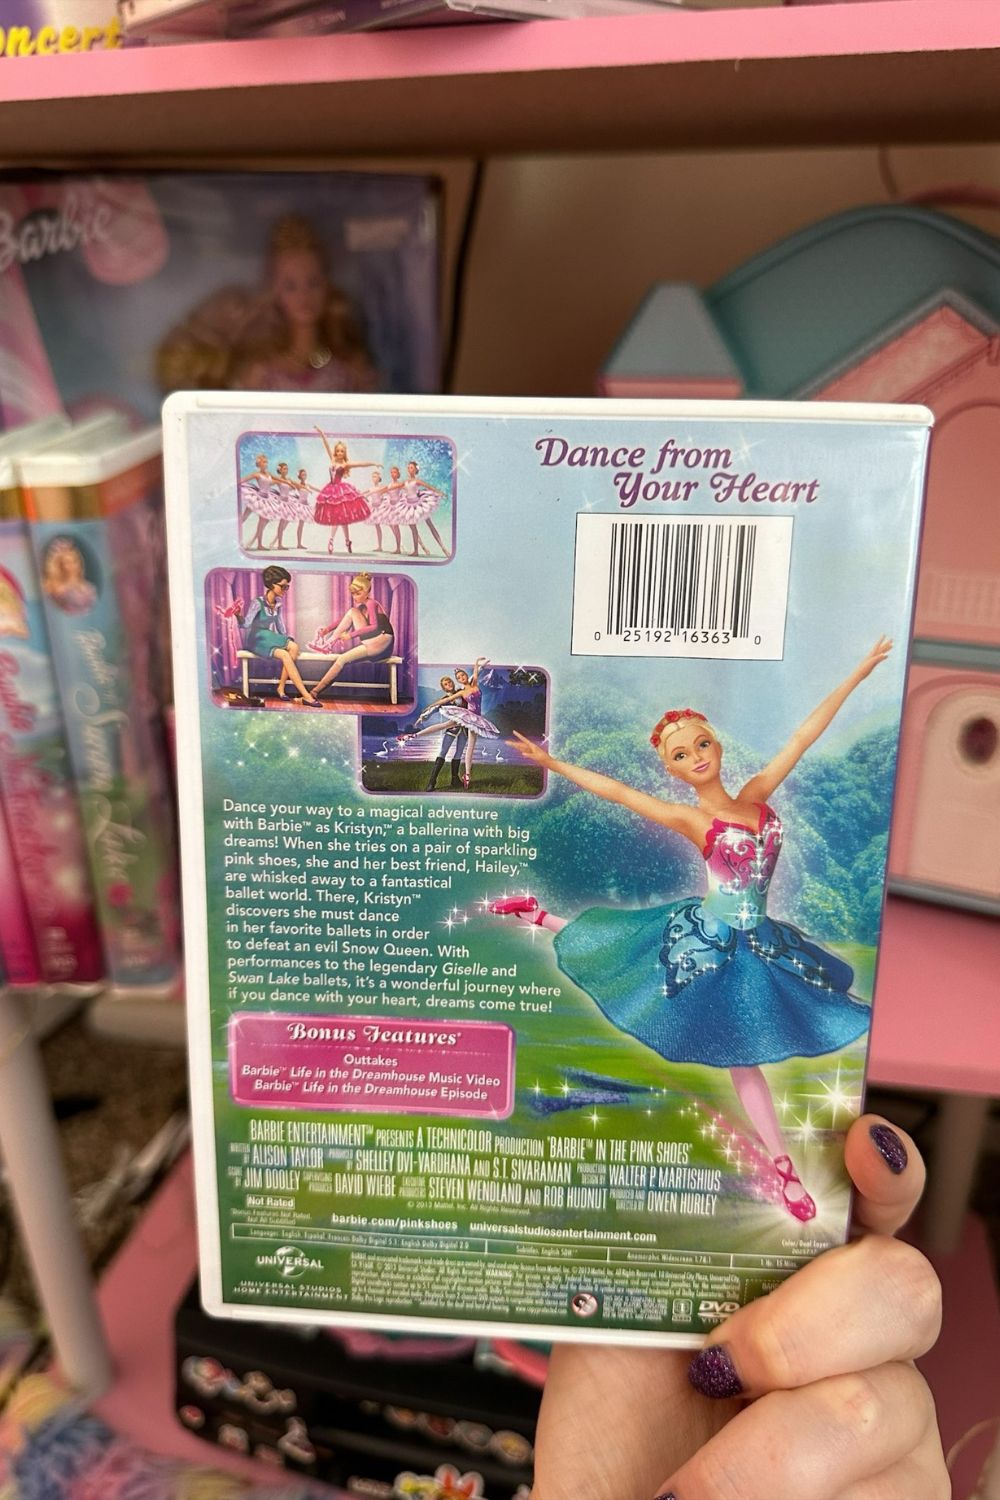 BARBIE THE PINK SHOES DVD*